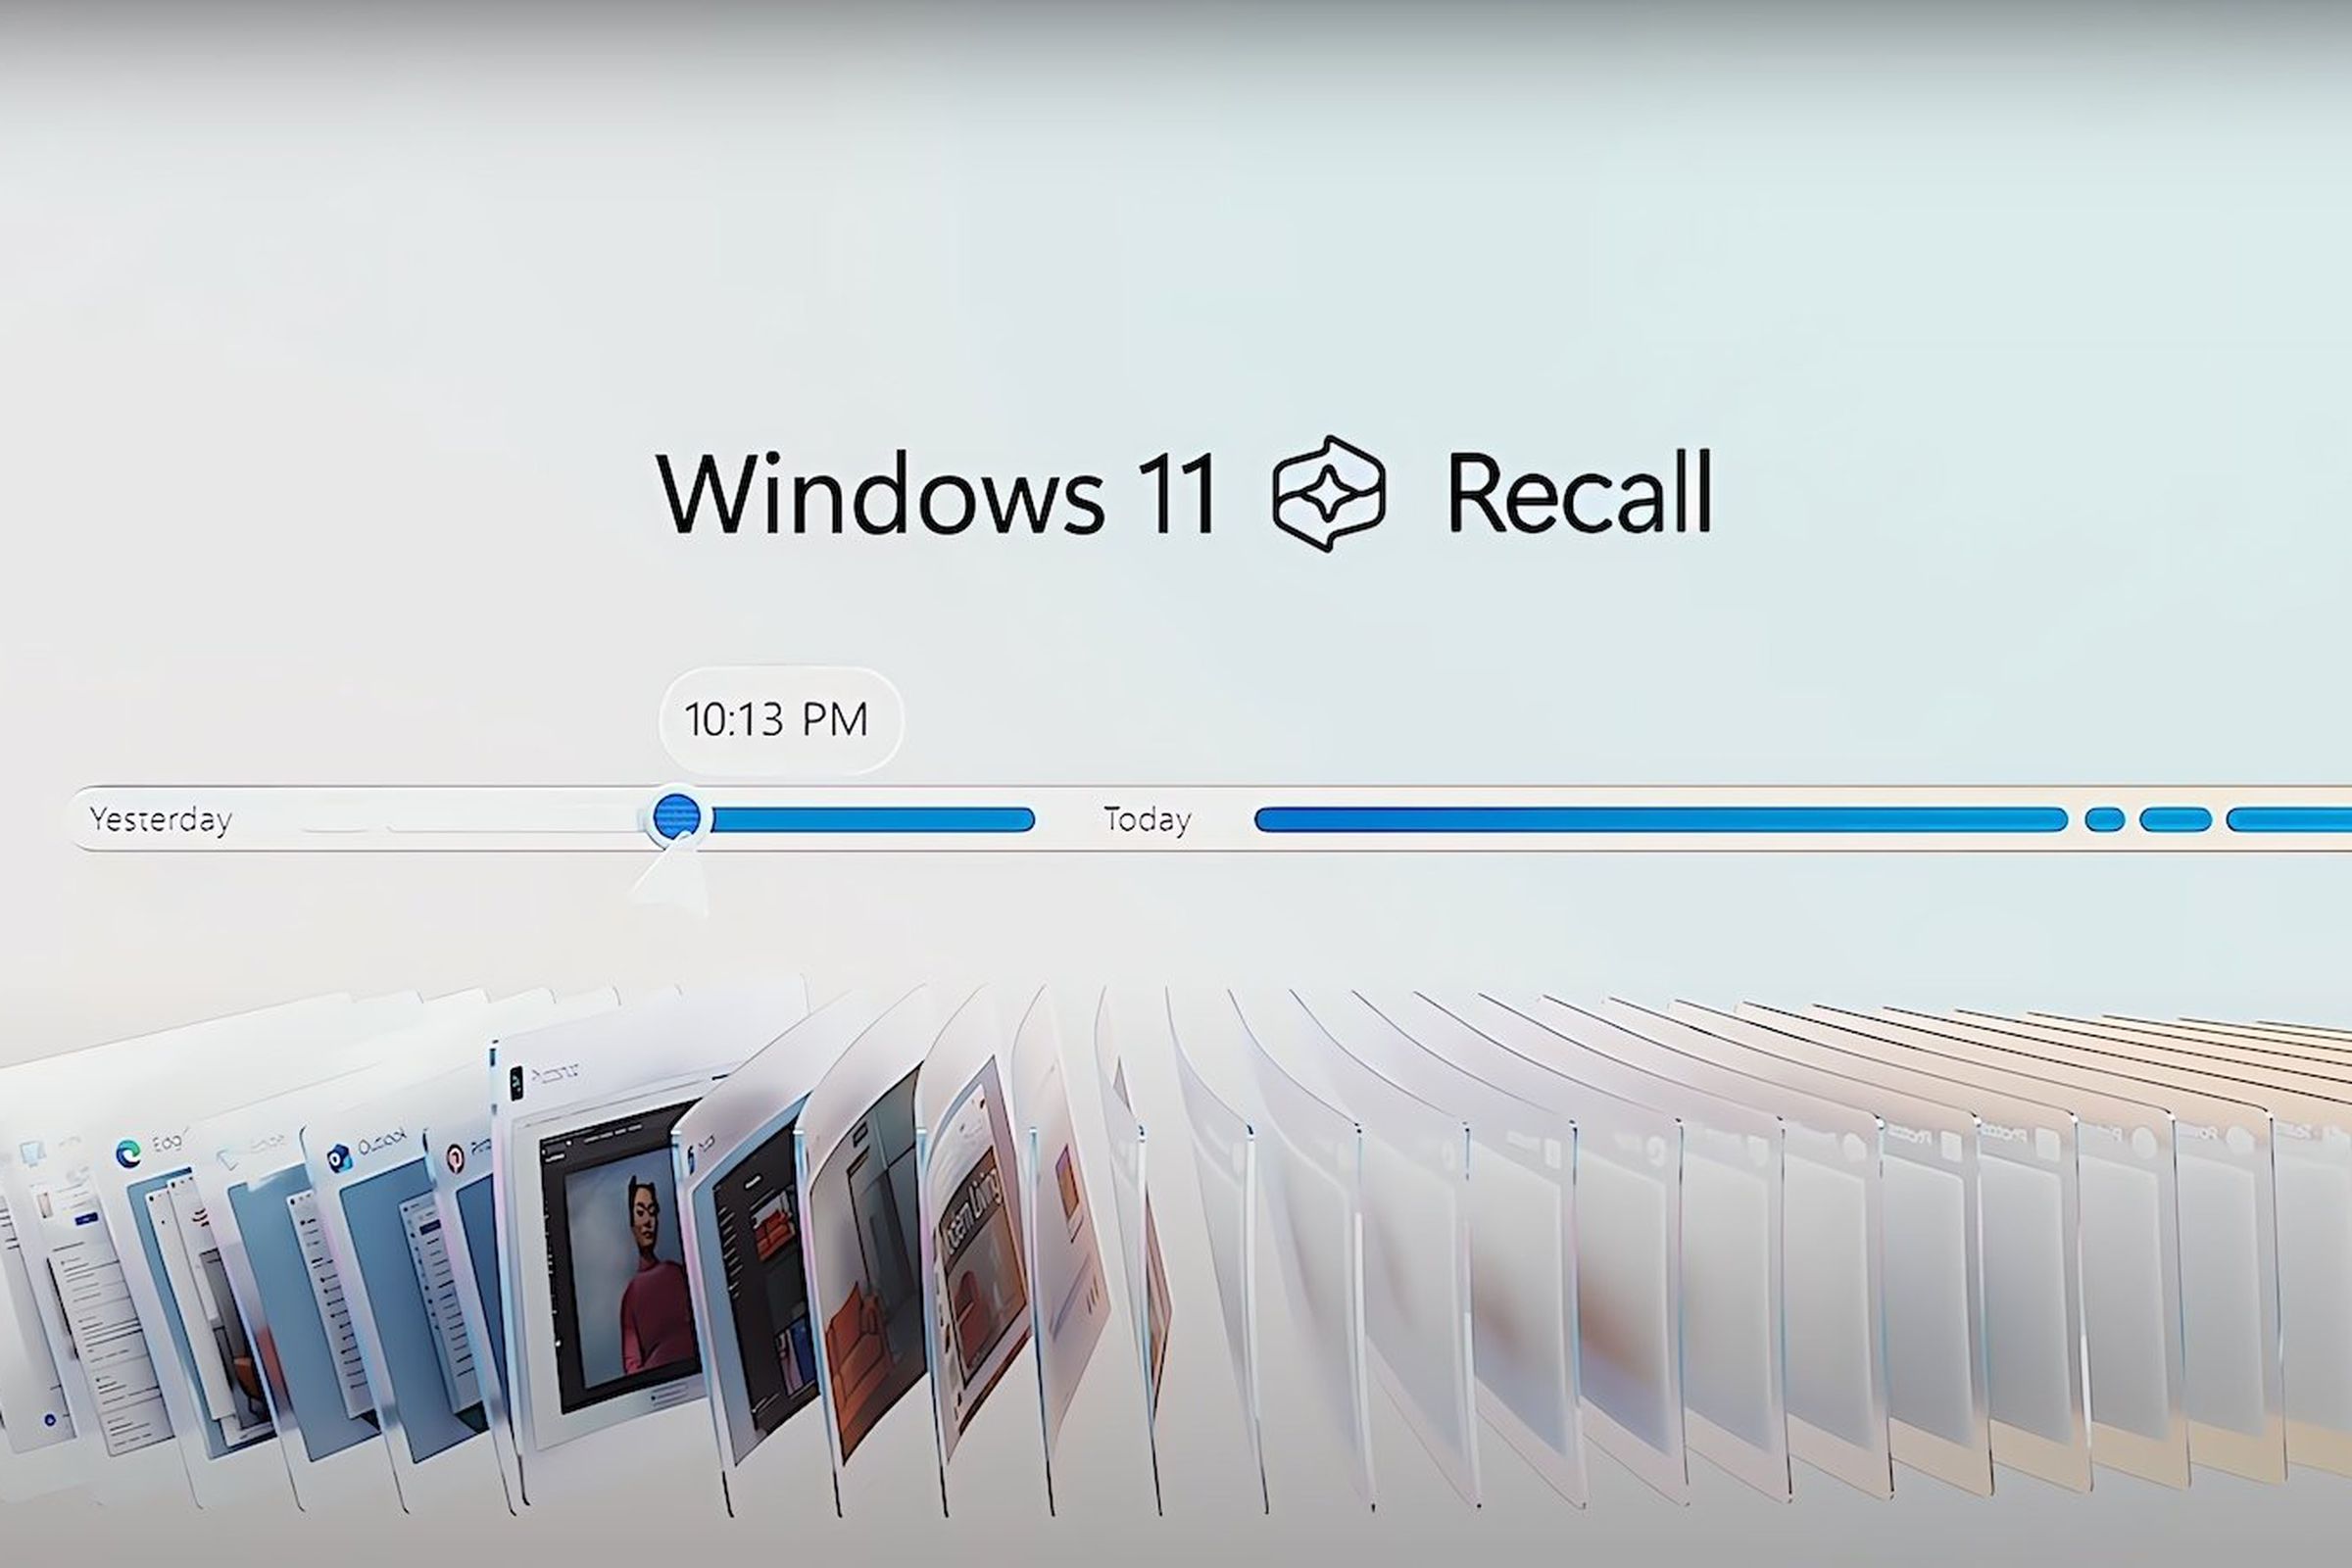 Illustration of Windows 11’s new Recall feature